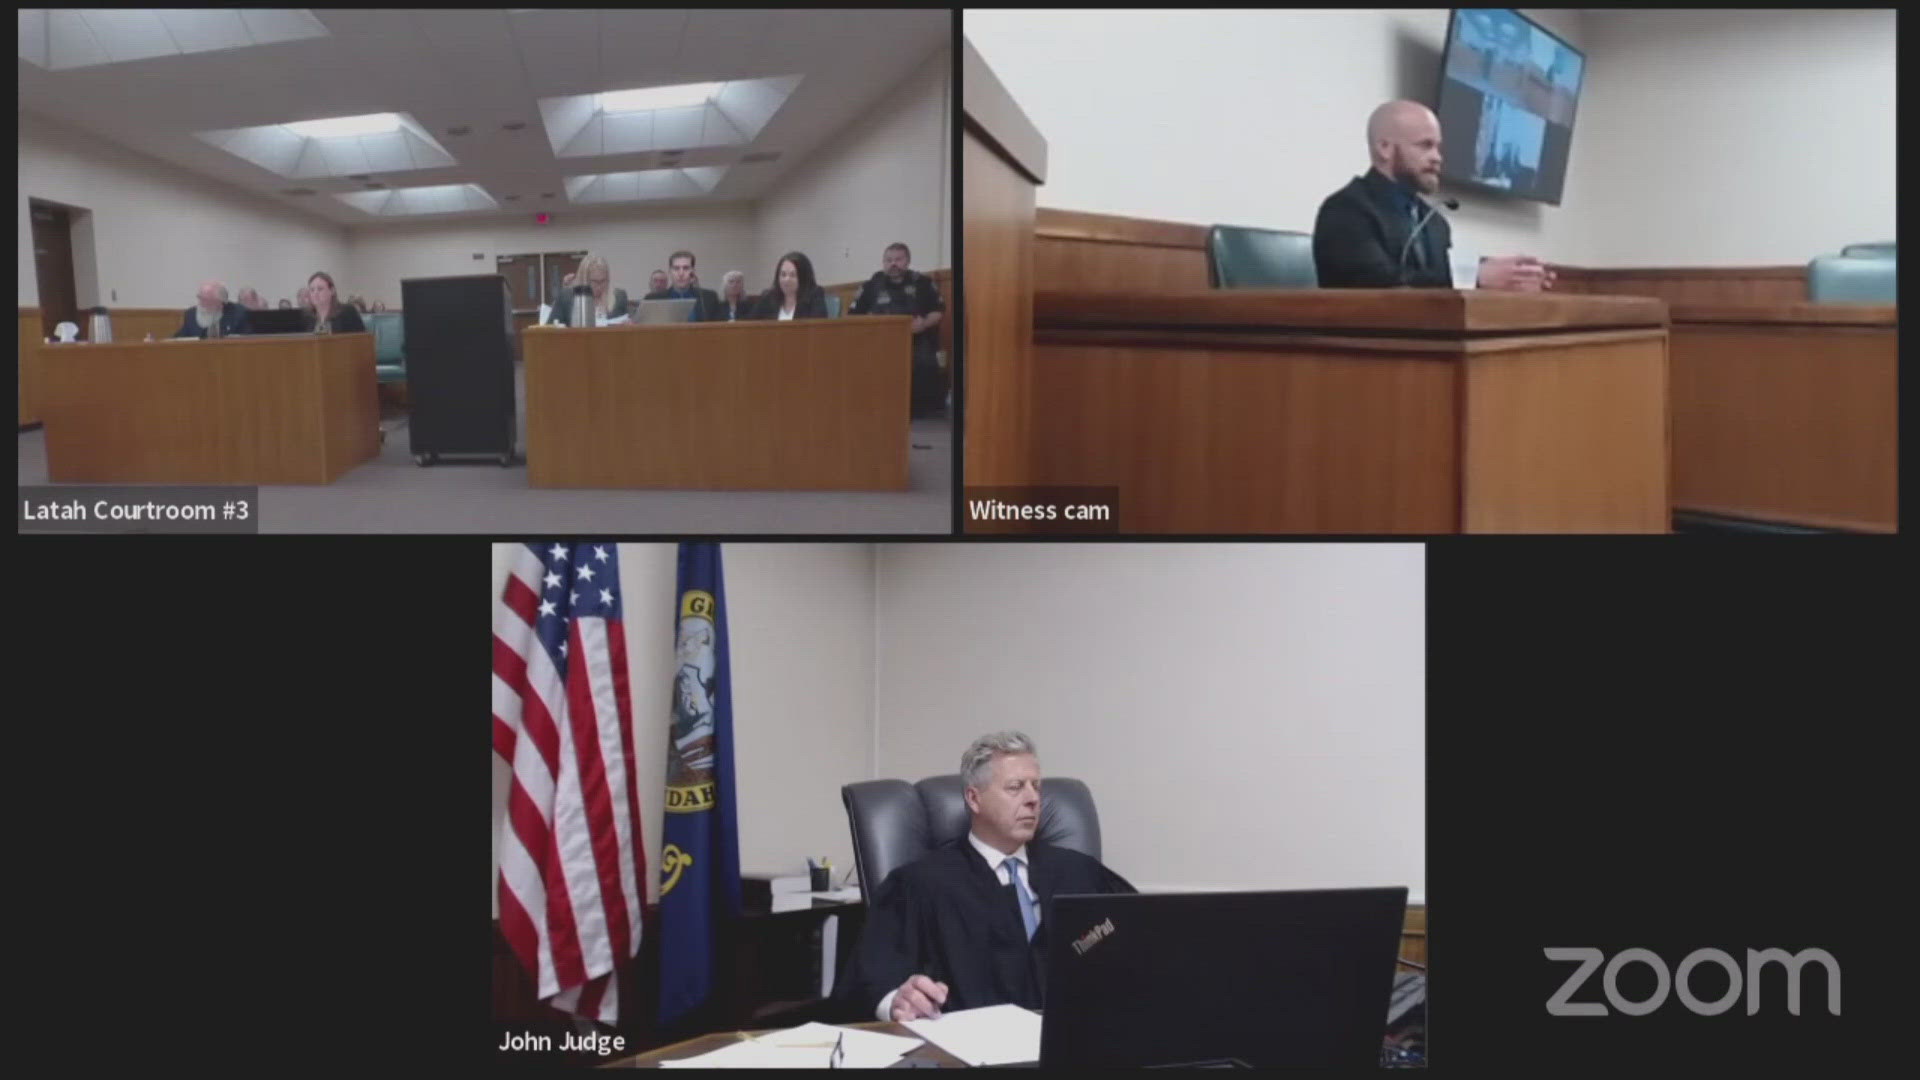 Judge John Judge scheduled a hearing for June 27 to discuss the schedule for the rest of the case, including dates for the trial as well as possible sentencing.